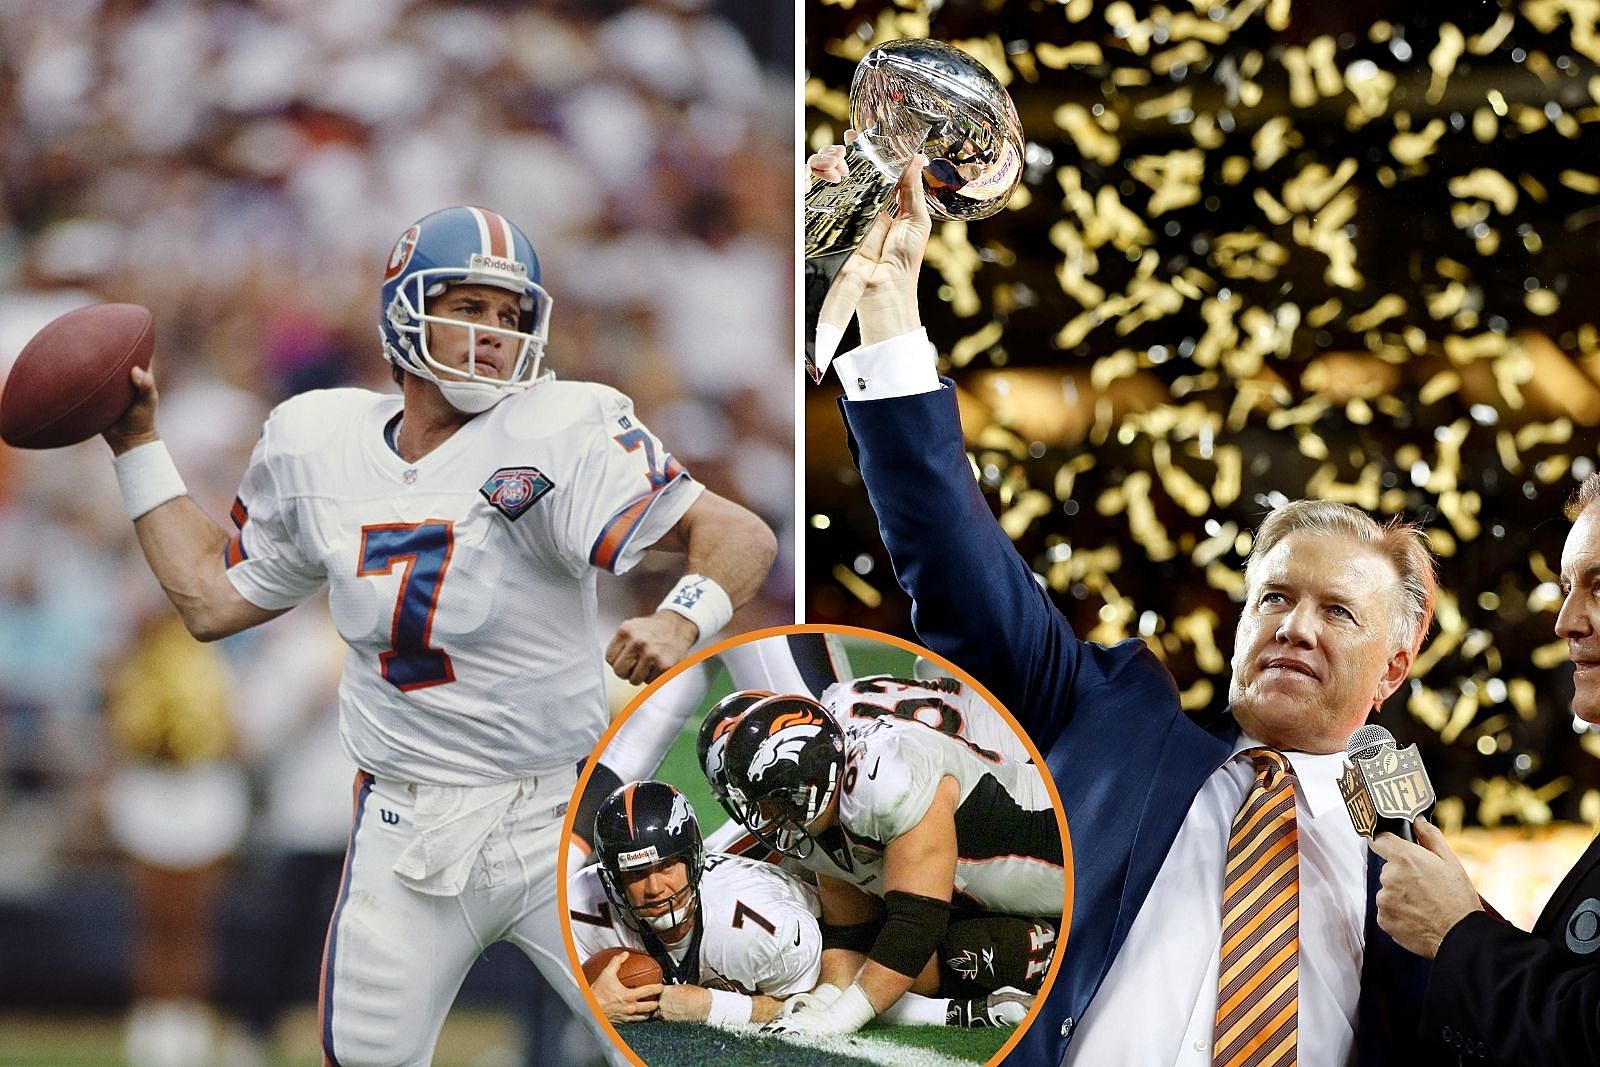 John Elway No Longer President Of Broncos. What's His New Role?